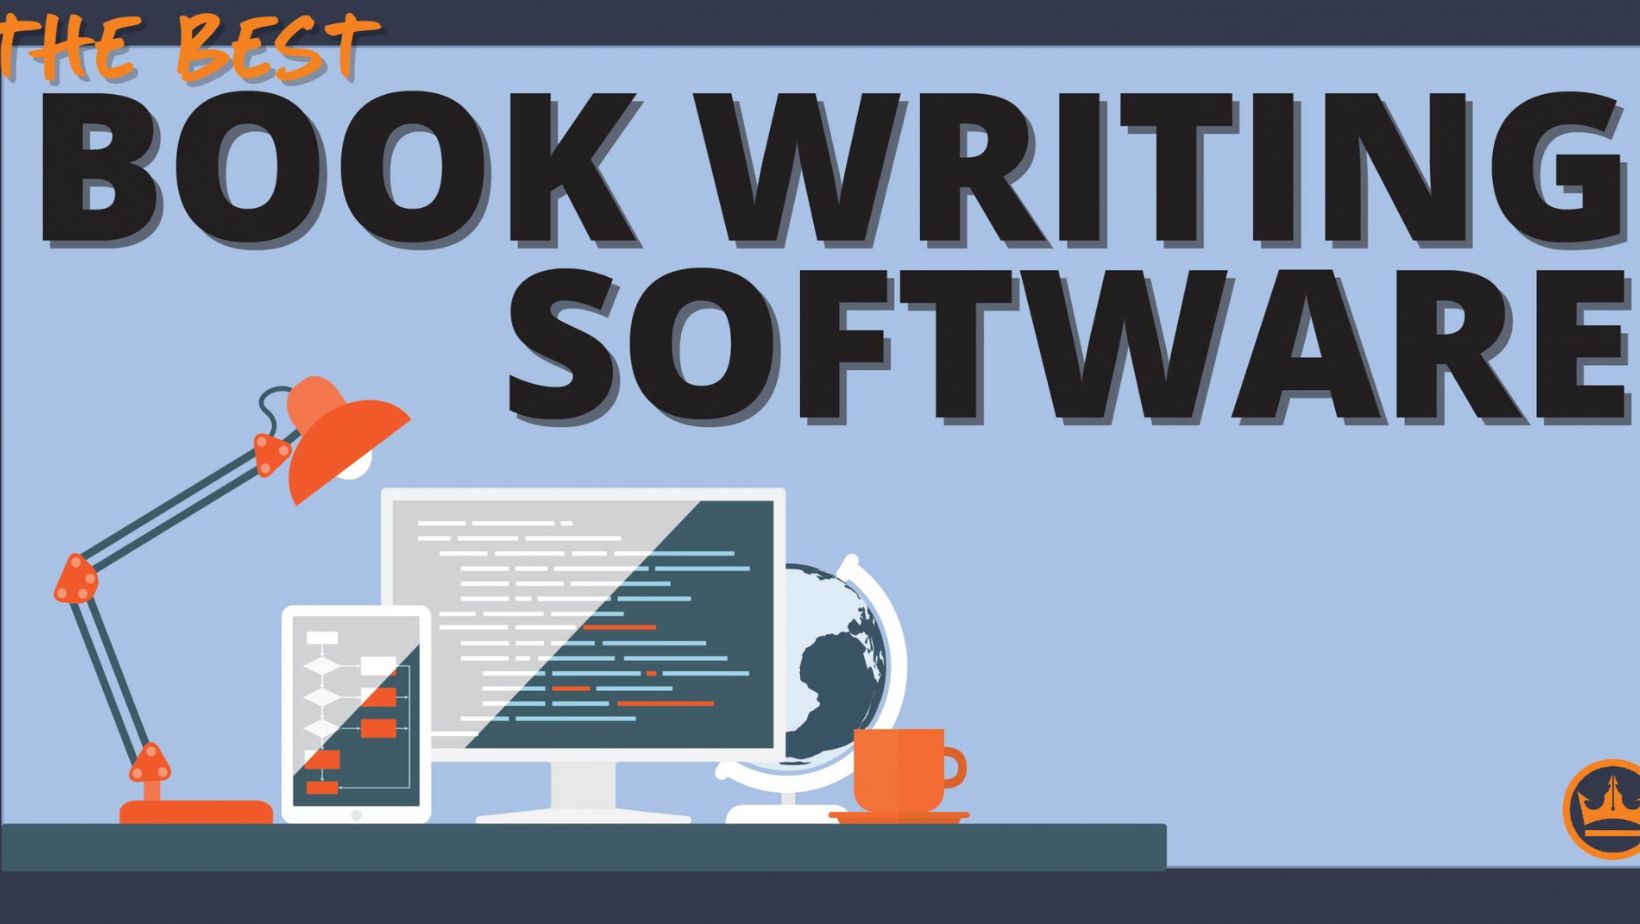 Author and Book Writing Software